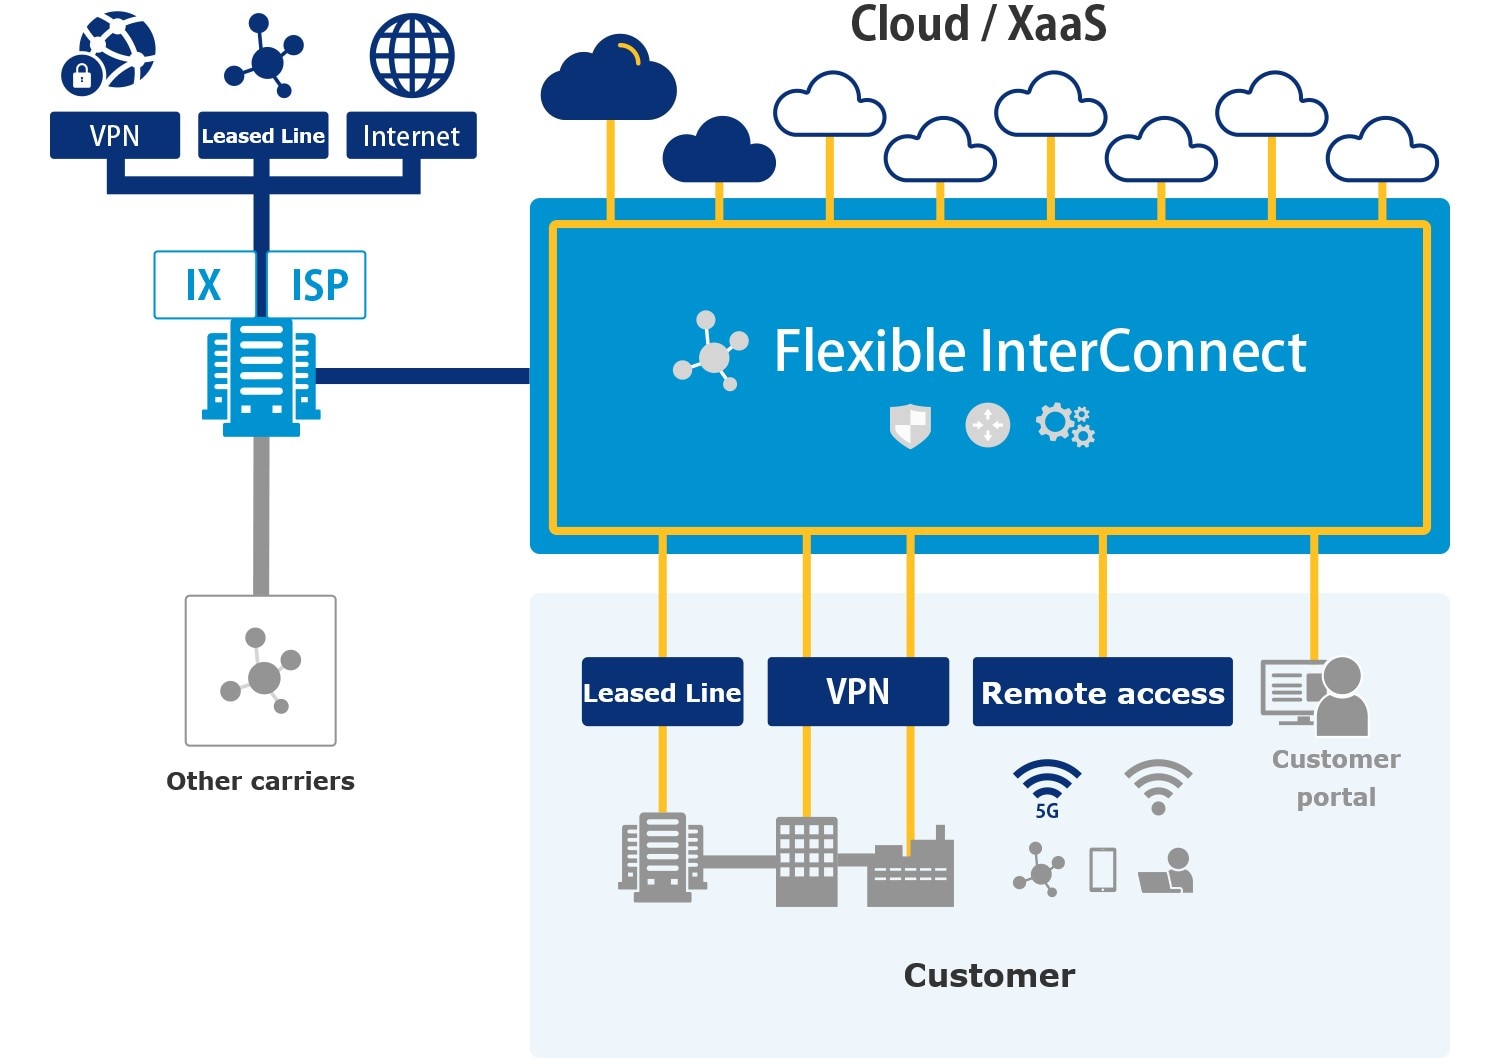 connection to Iaas, Saas and cloud